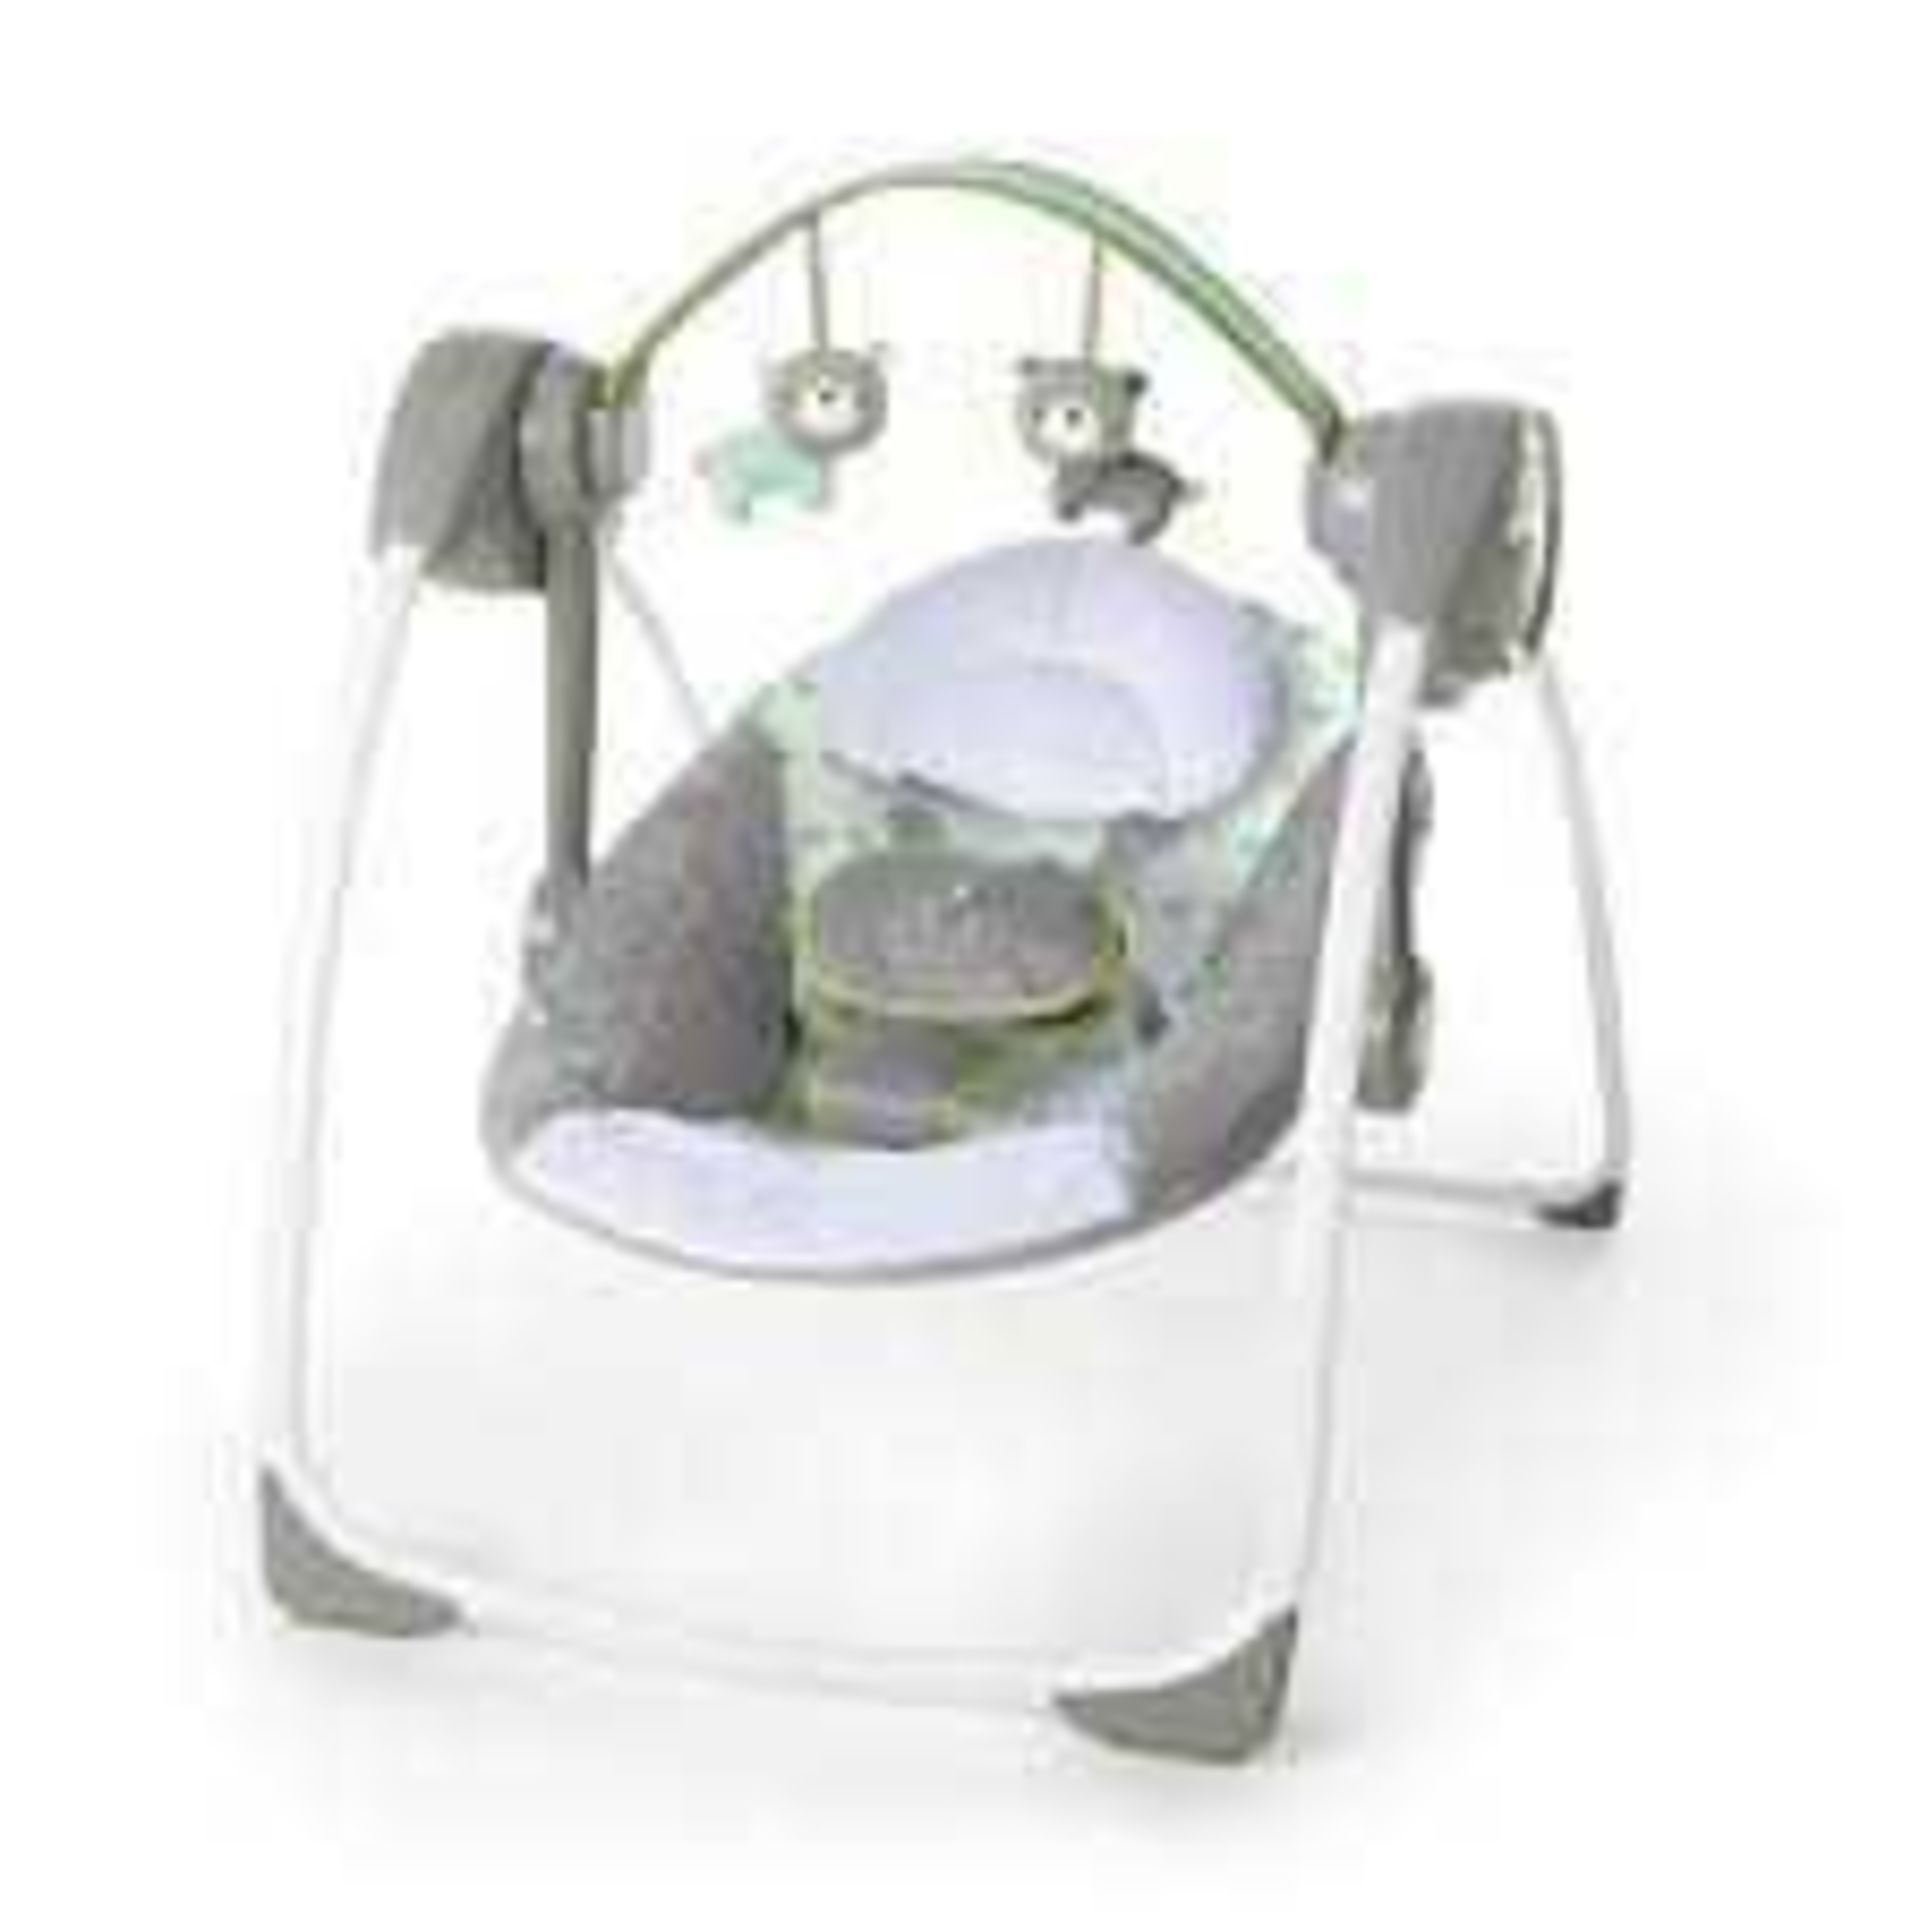 Combined RRP £120 Lot To Contain 2 Boxed Ingenuity Convert Me Swing 2 Seat Portable Swing - Image 2 of 2